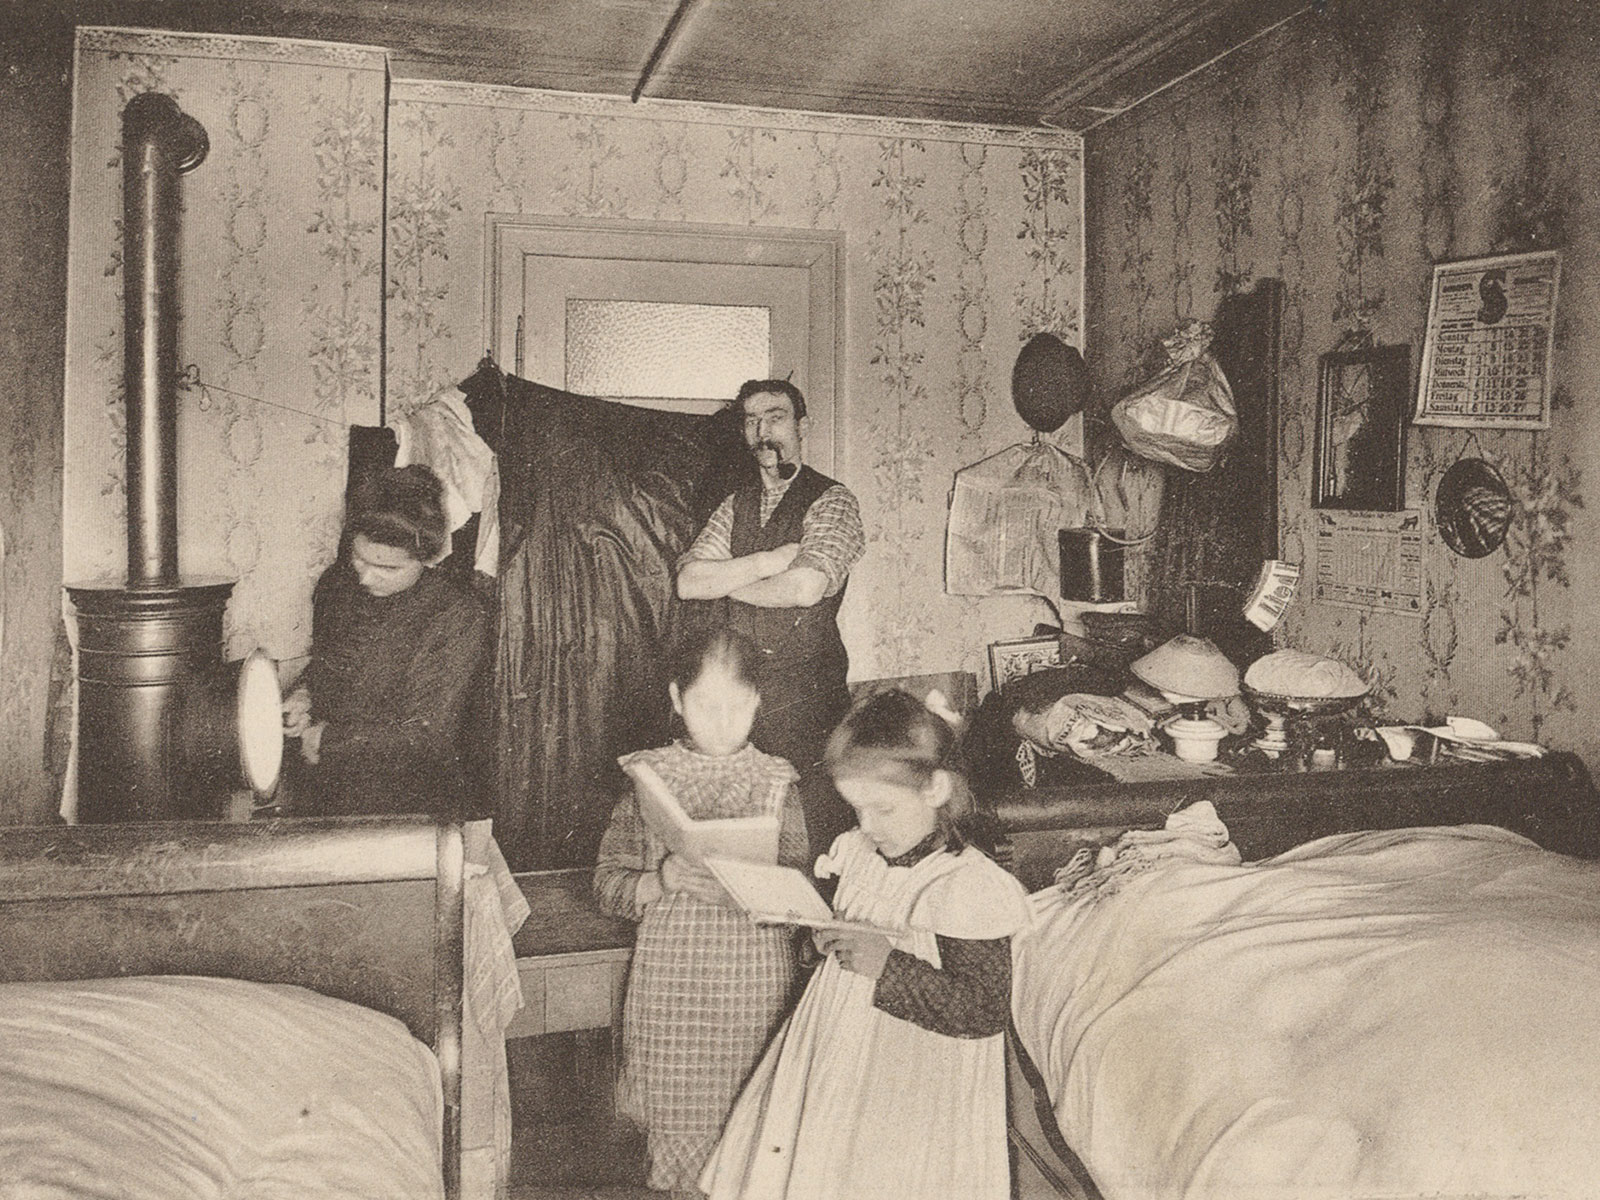 working-class family in an apartment